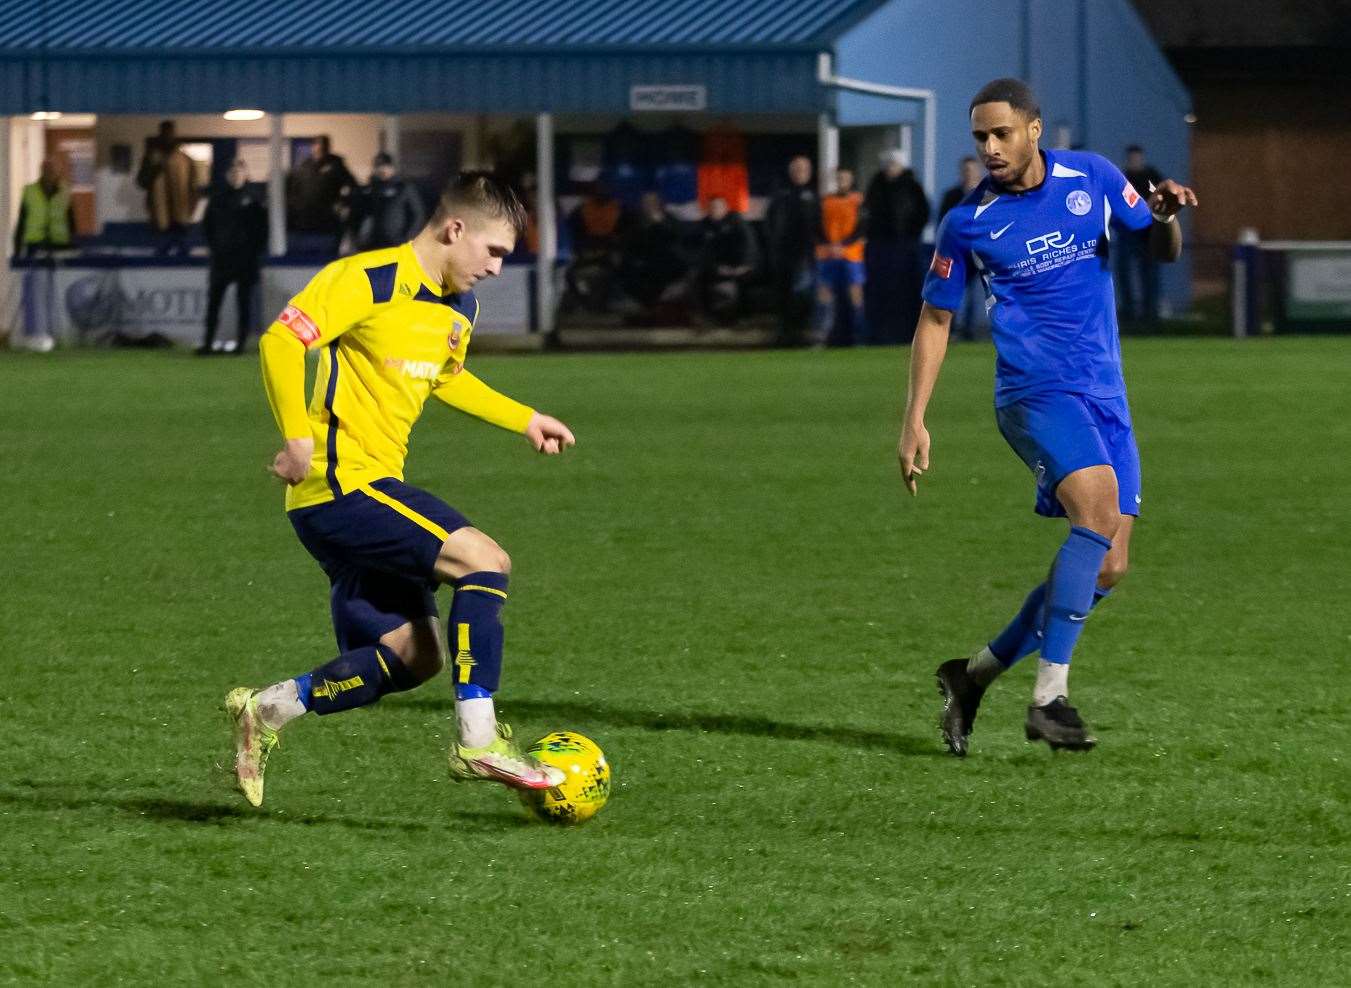 Herne Bay in action against Whitstable during their 2021/22 season at Winch's Field. Their pitch has been stripped out and work to install a 3G pitch is under way. Picture: Les Biggs